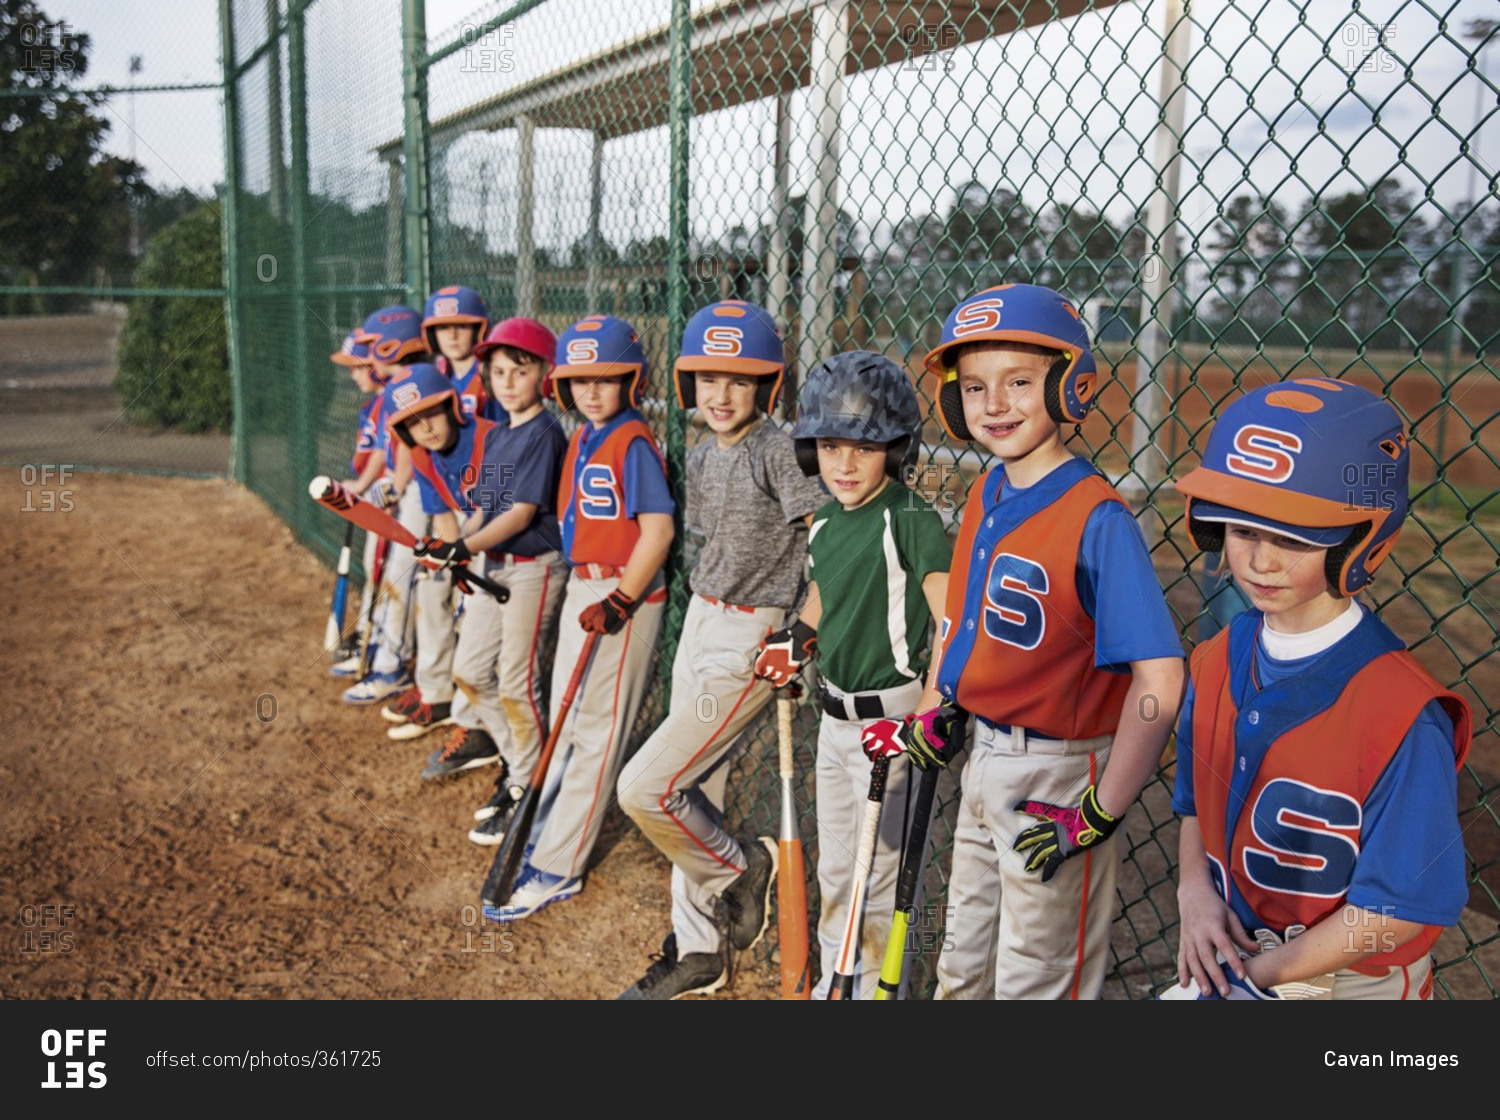 Baseball team standing by chain-link fence on field